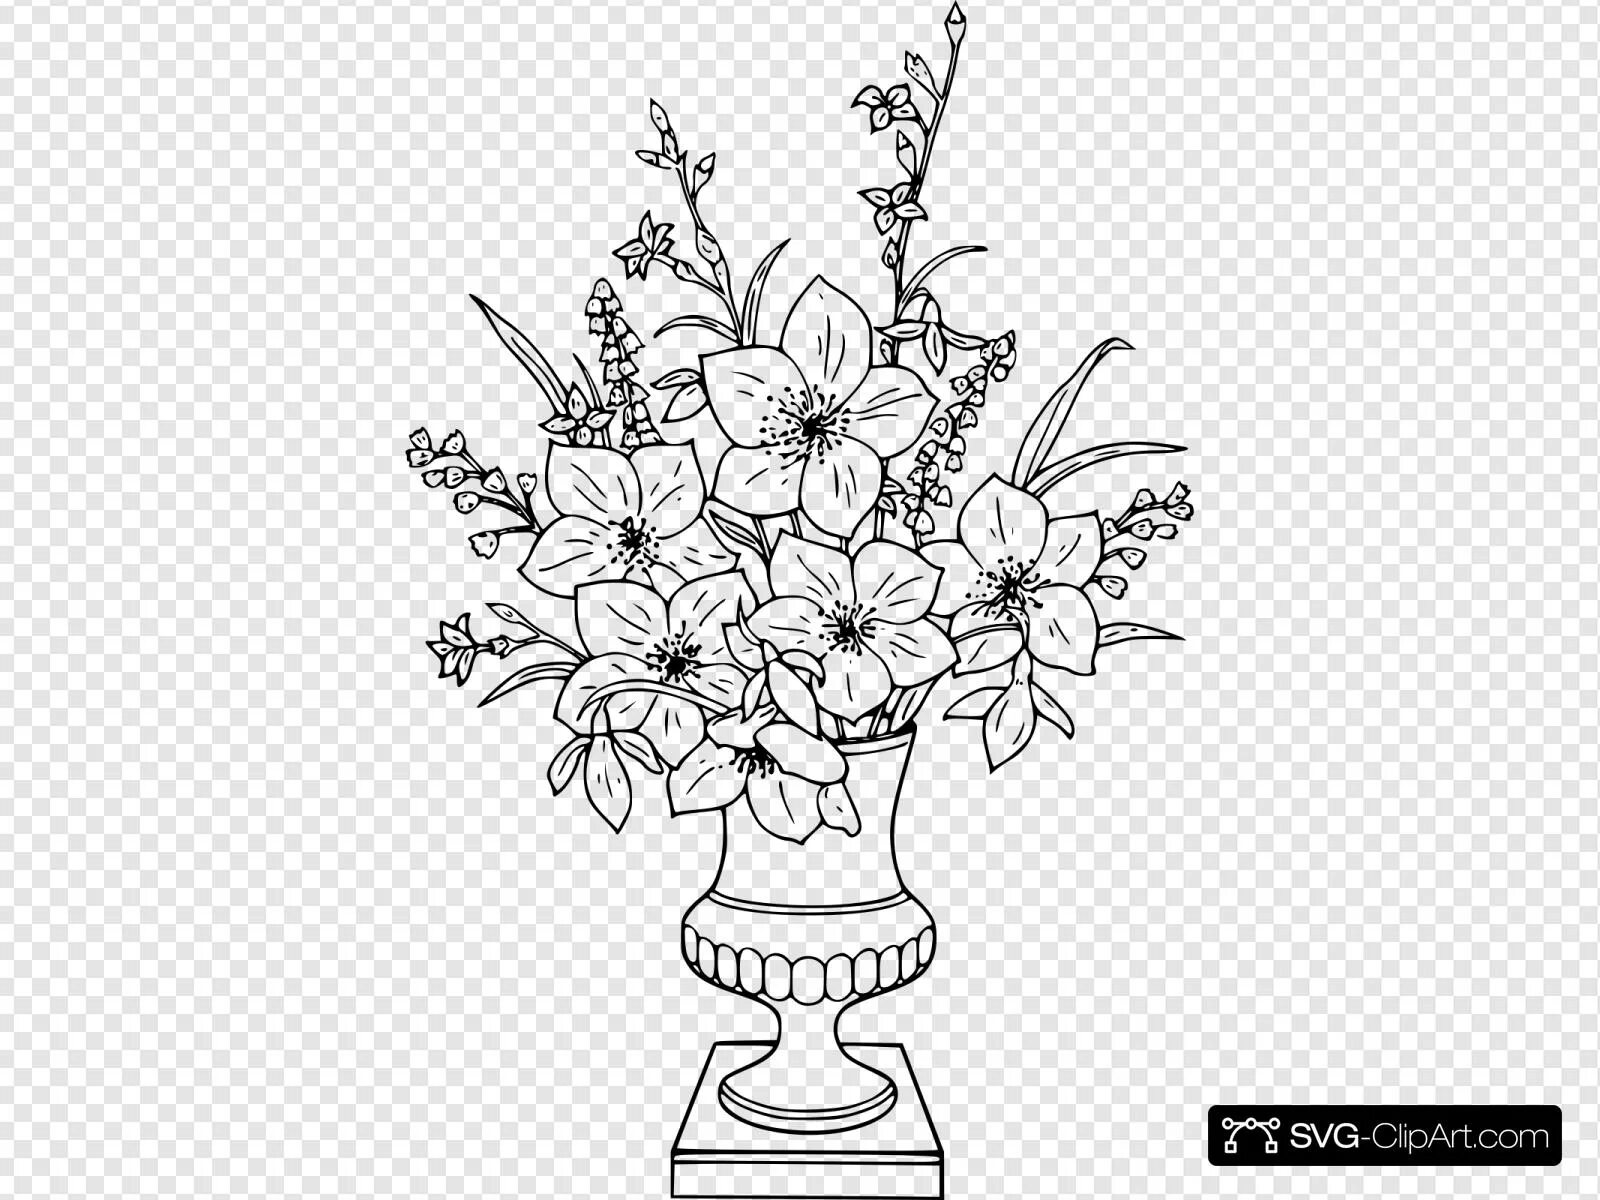 Violent bouquet of flowers in a vase coloring book